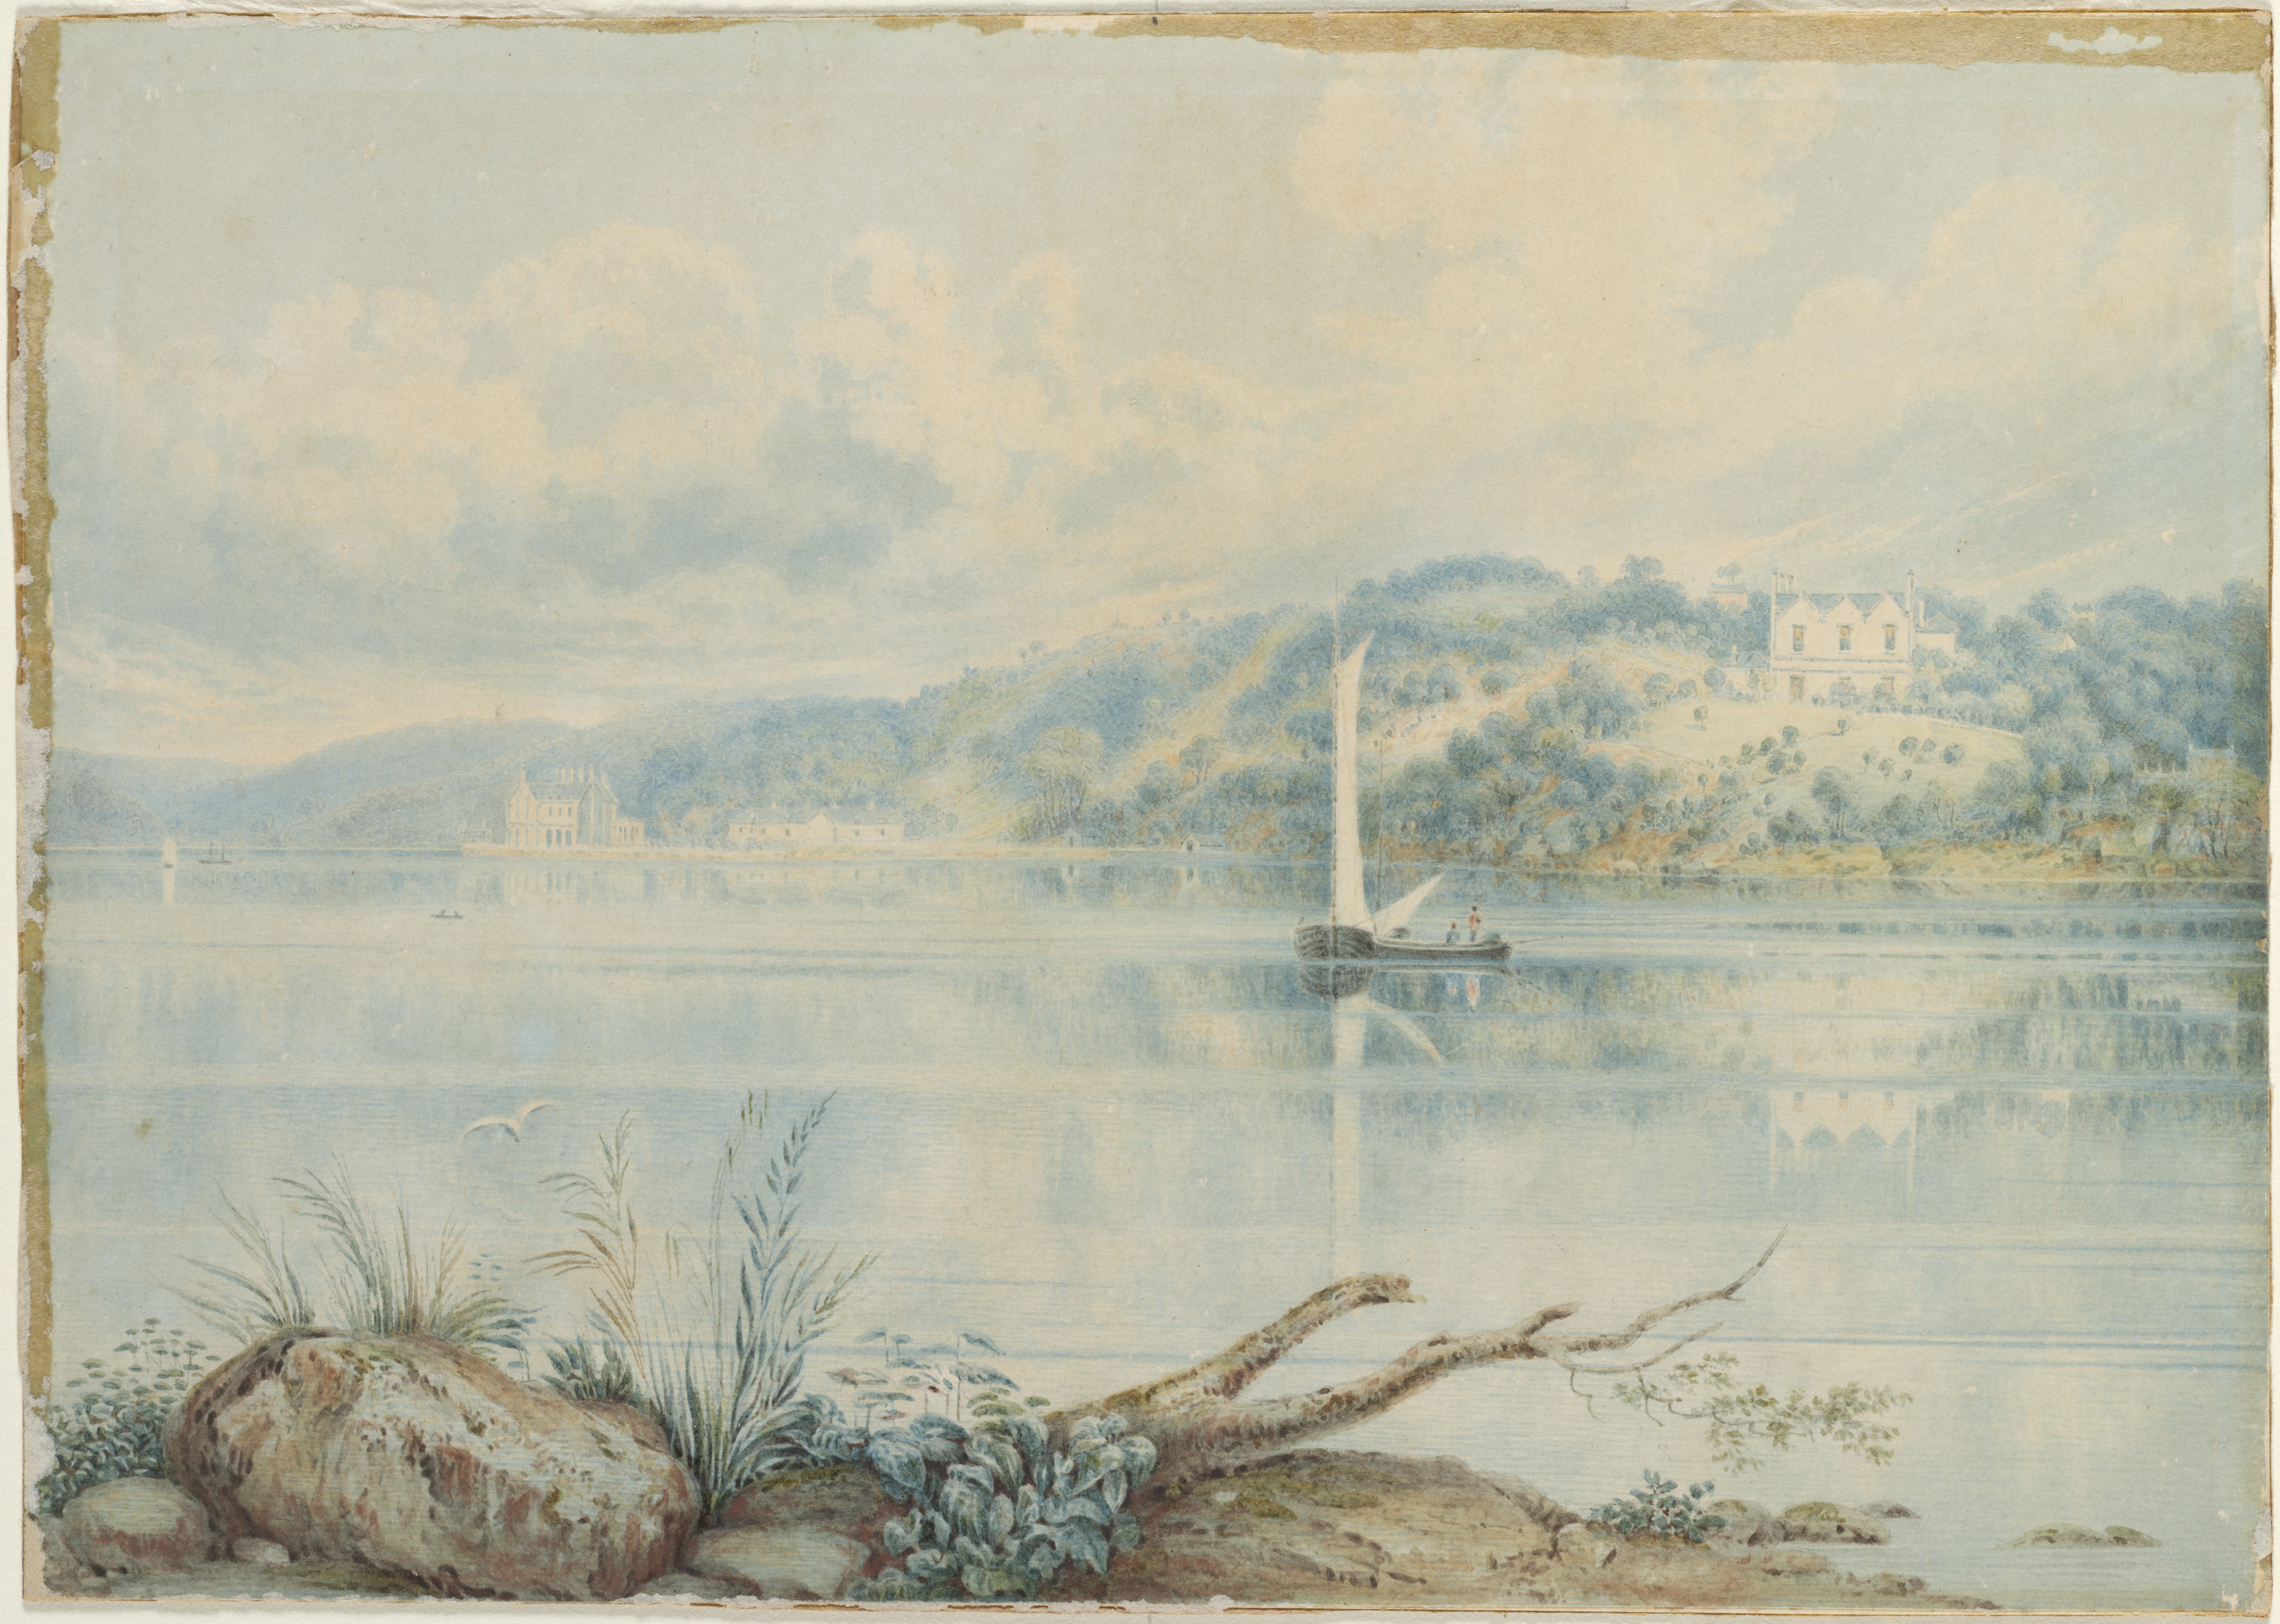 Carthona and Lindesay, Darling Point, from Clark Island, ca. 1844